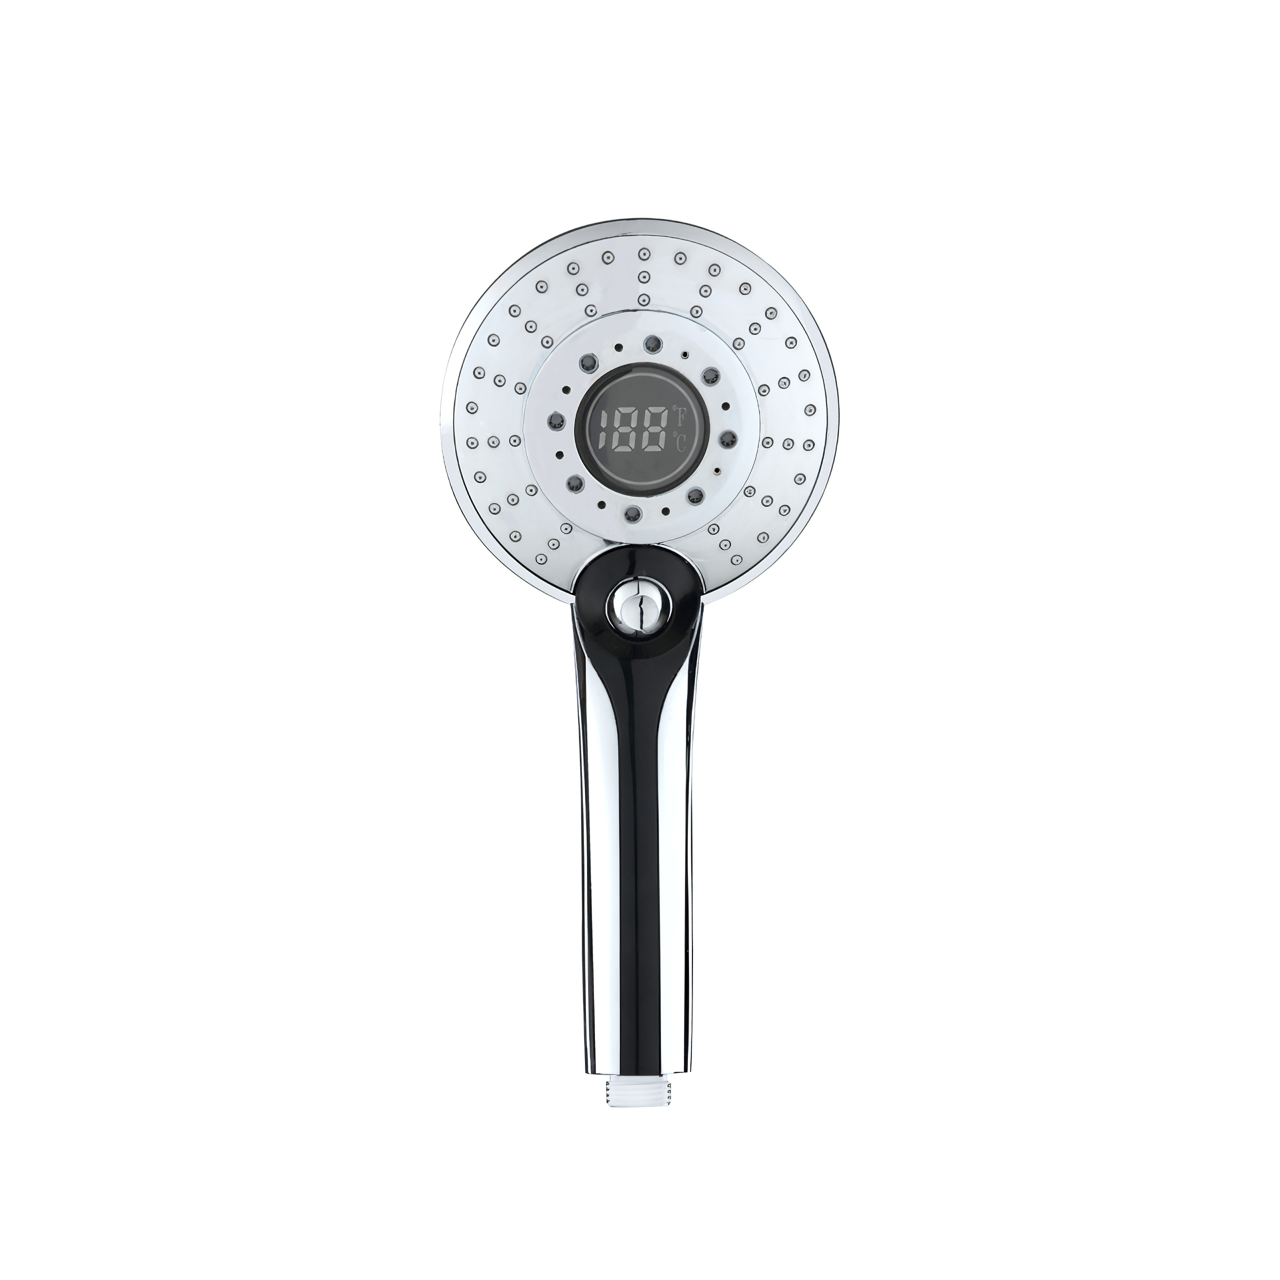 OJ-JB021Y Shower Head with Temperature Display LED Shower Head Color Changing 3 Spray Modes Easy to Install Chrome Plastic Hand Shower